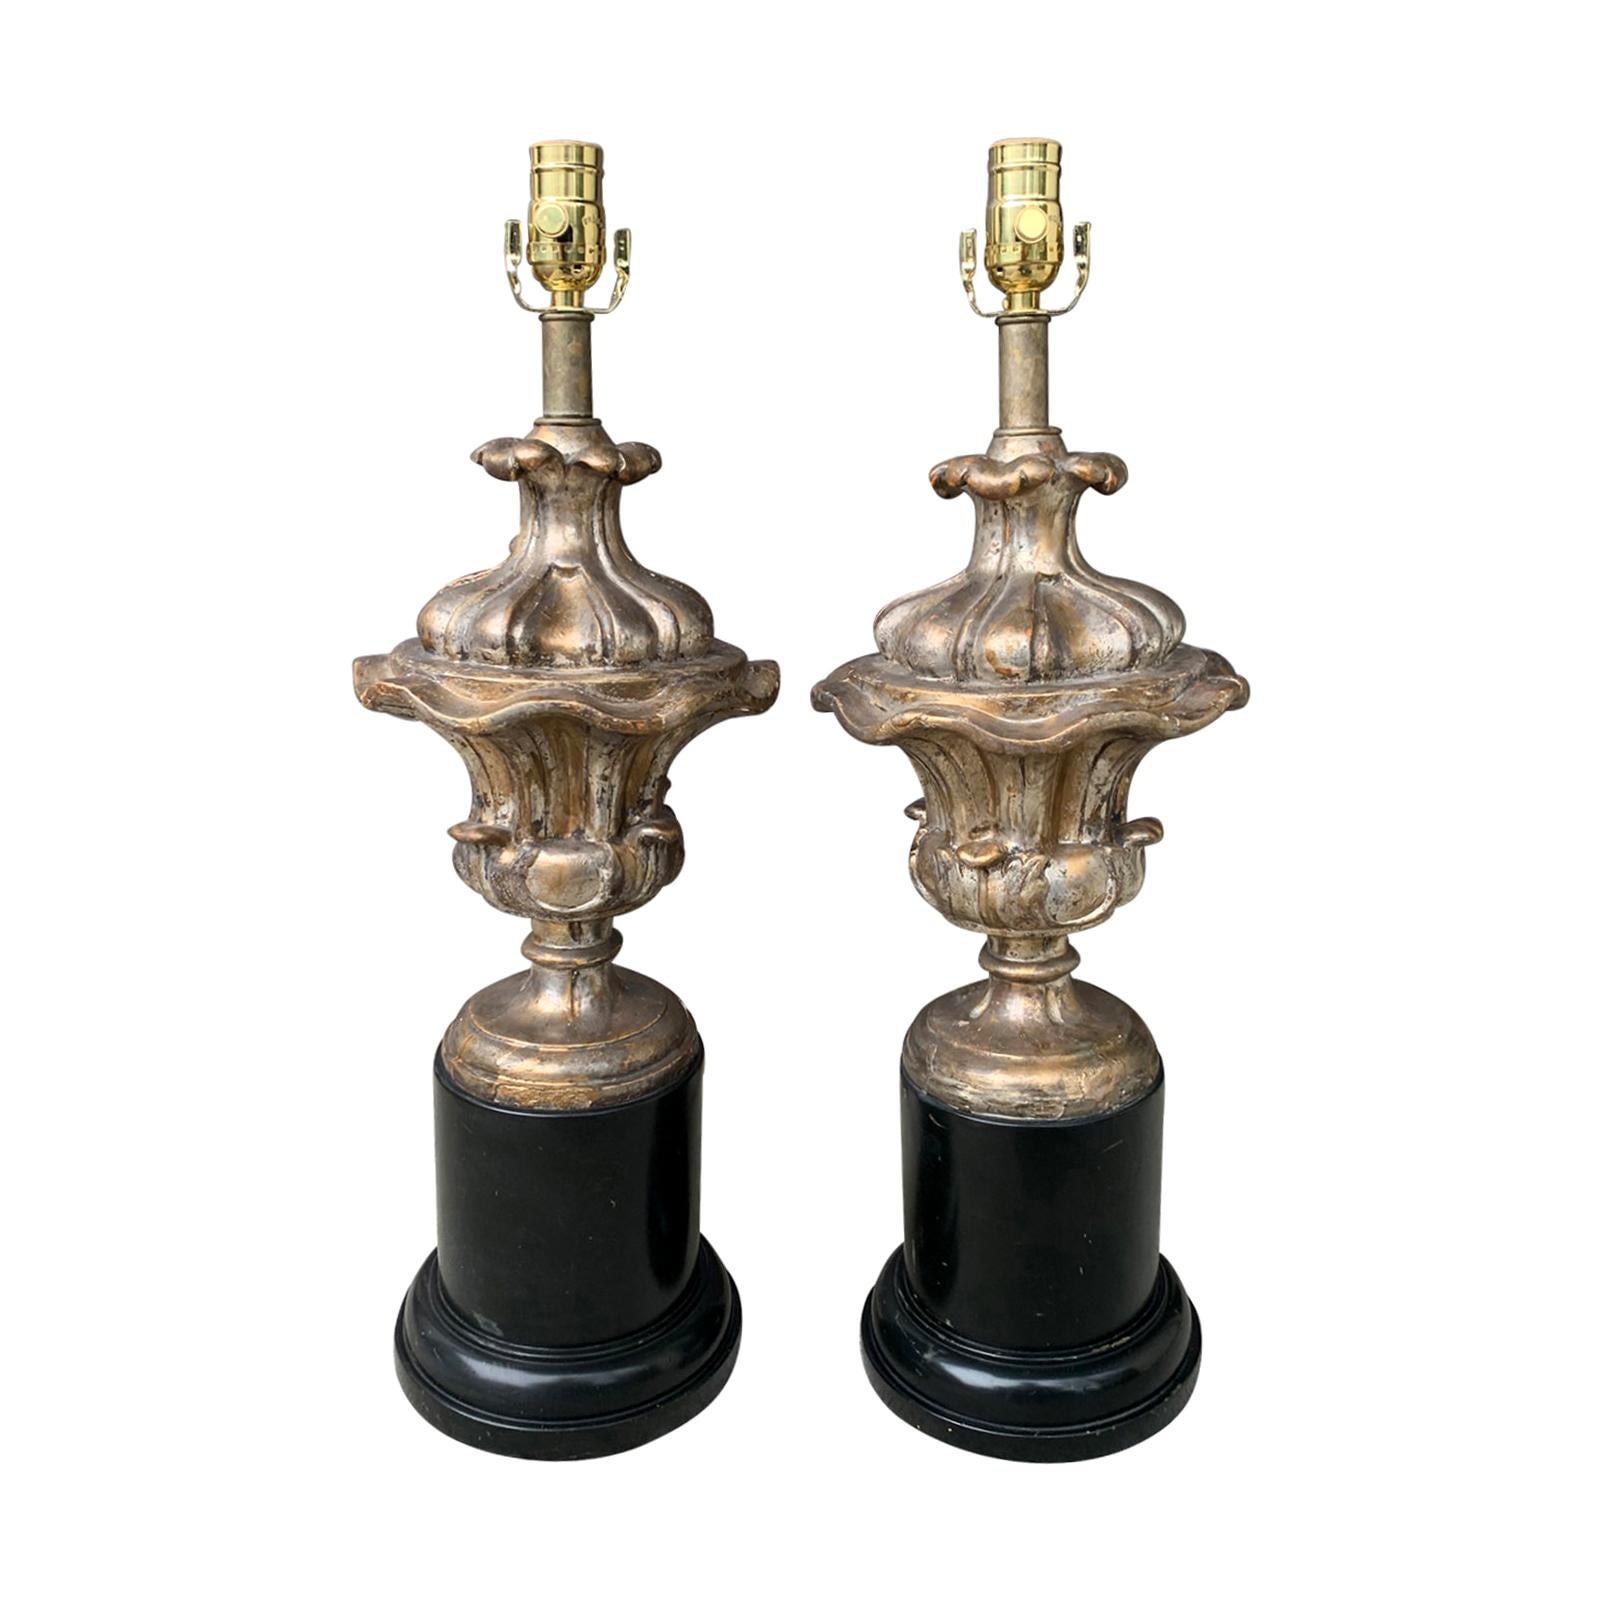 Pair of 18th Century Italian Silver Gilt Urns as Lamps on Old Black Bases